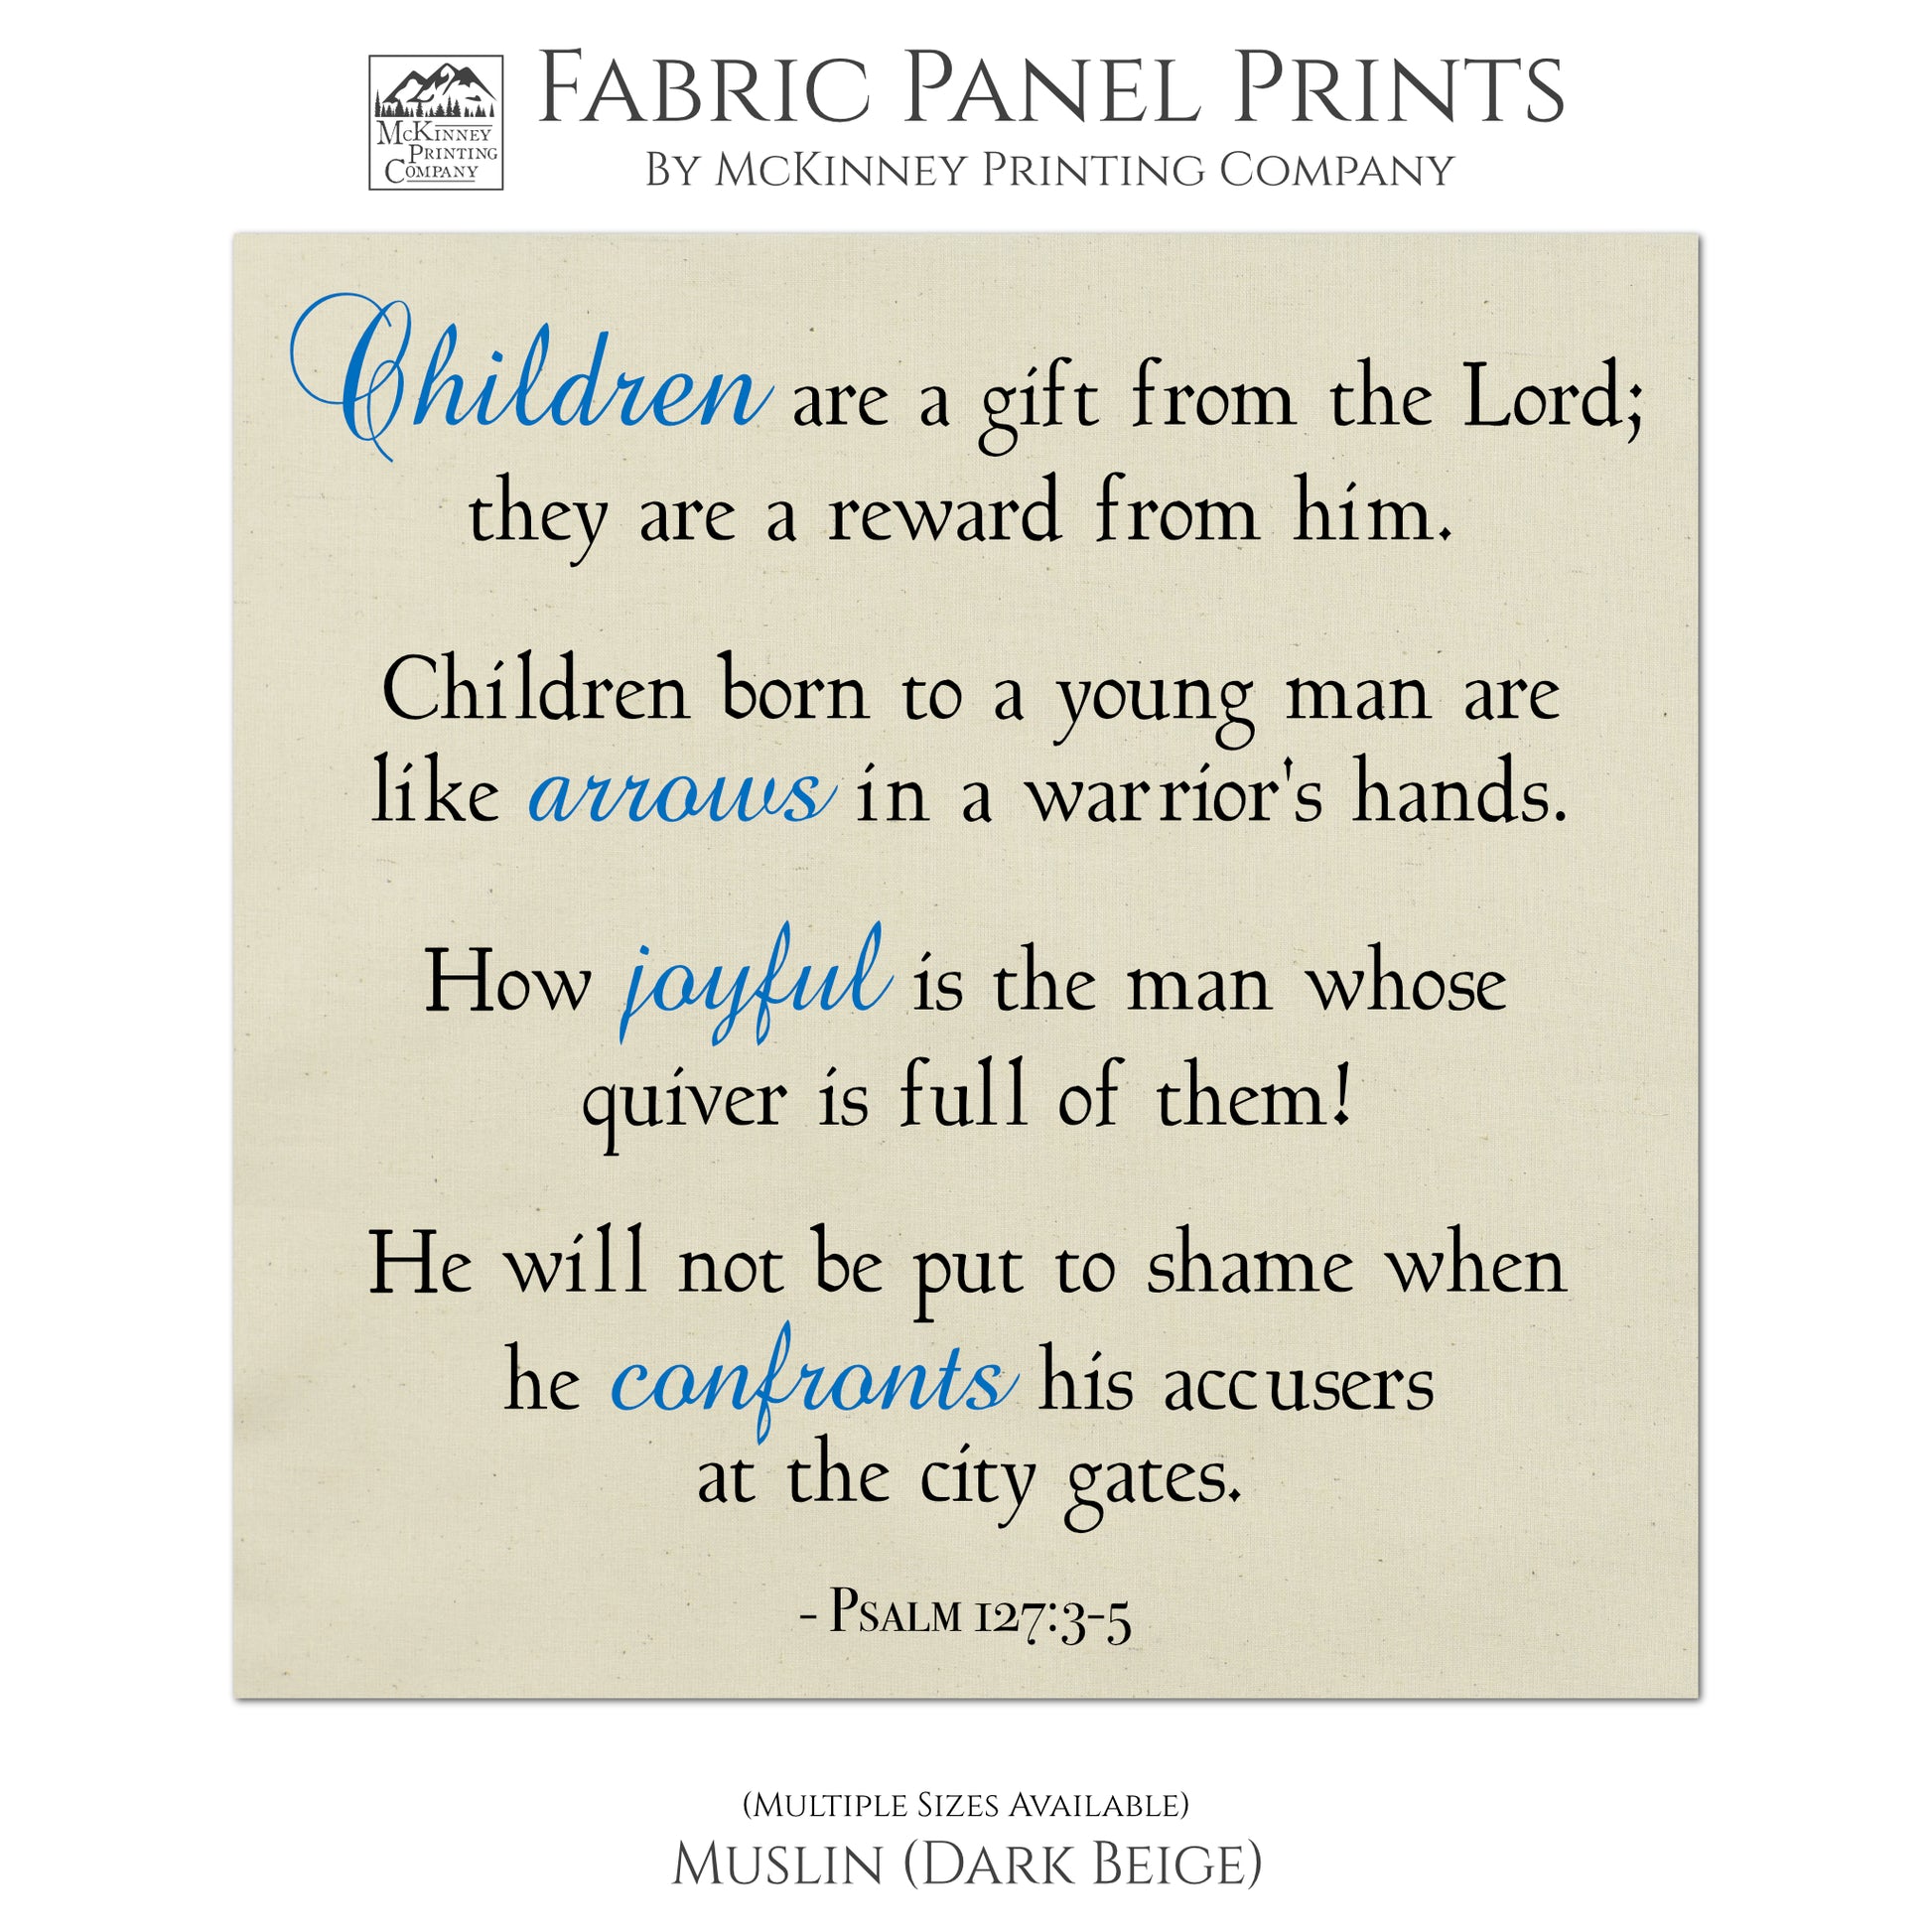 Children are a gift from the Lord; they are a reward from him. Children born to a young man are like arrows in a warrior's hands. How joyful is the man whose quiver is full of them! He will not be put to shame when he confronts his accusers at the city gates - Psalm 127:3-5, Religious Fabric, Scripture, Quilt Block Fabric - Muslin